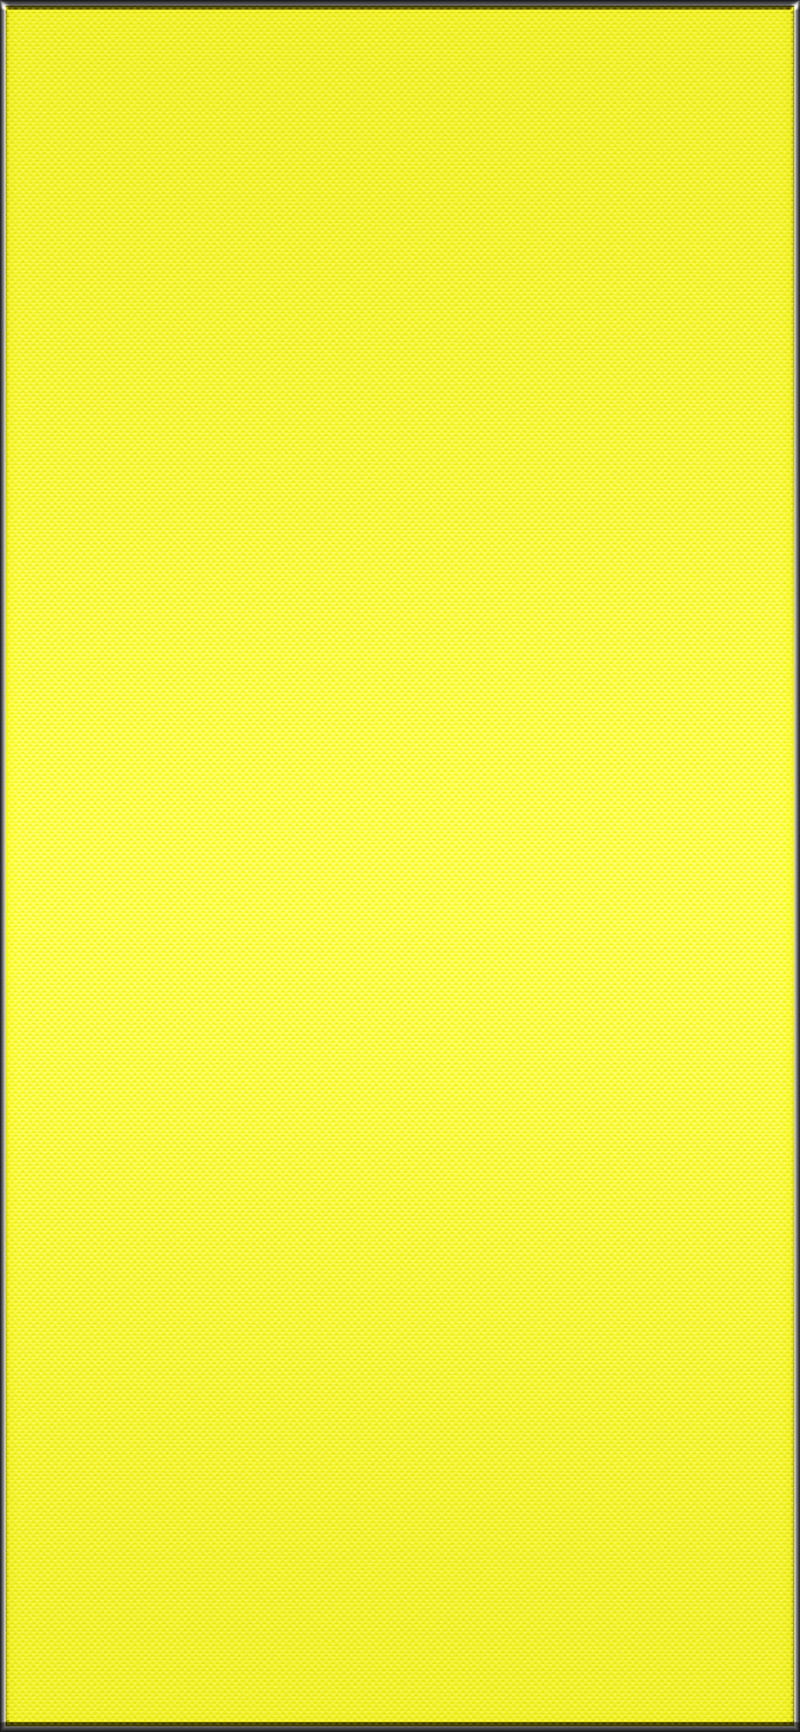 Yellow Background Images HD Pictures and Wallpaper For Free Download   Pngtree